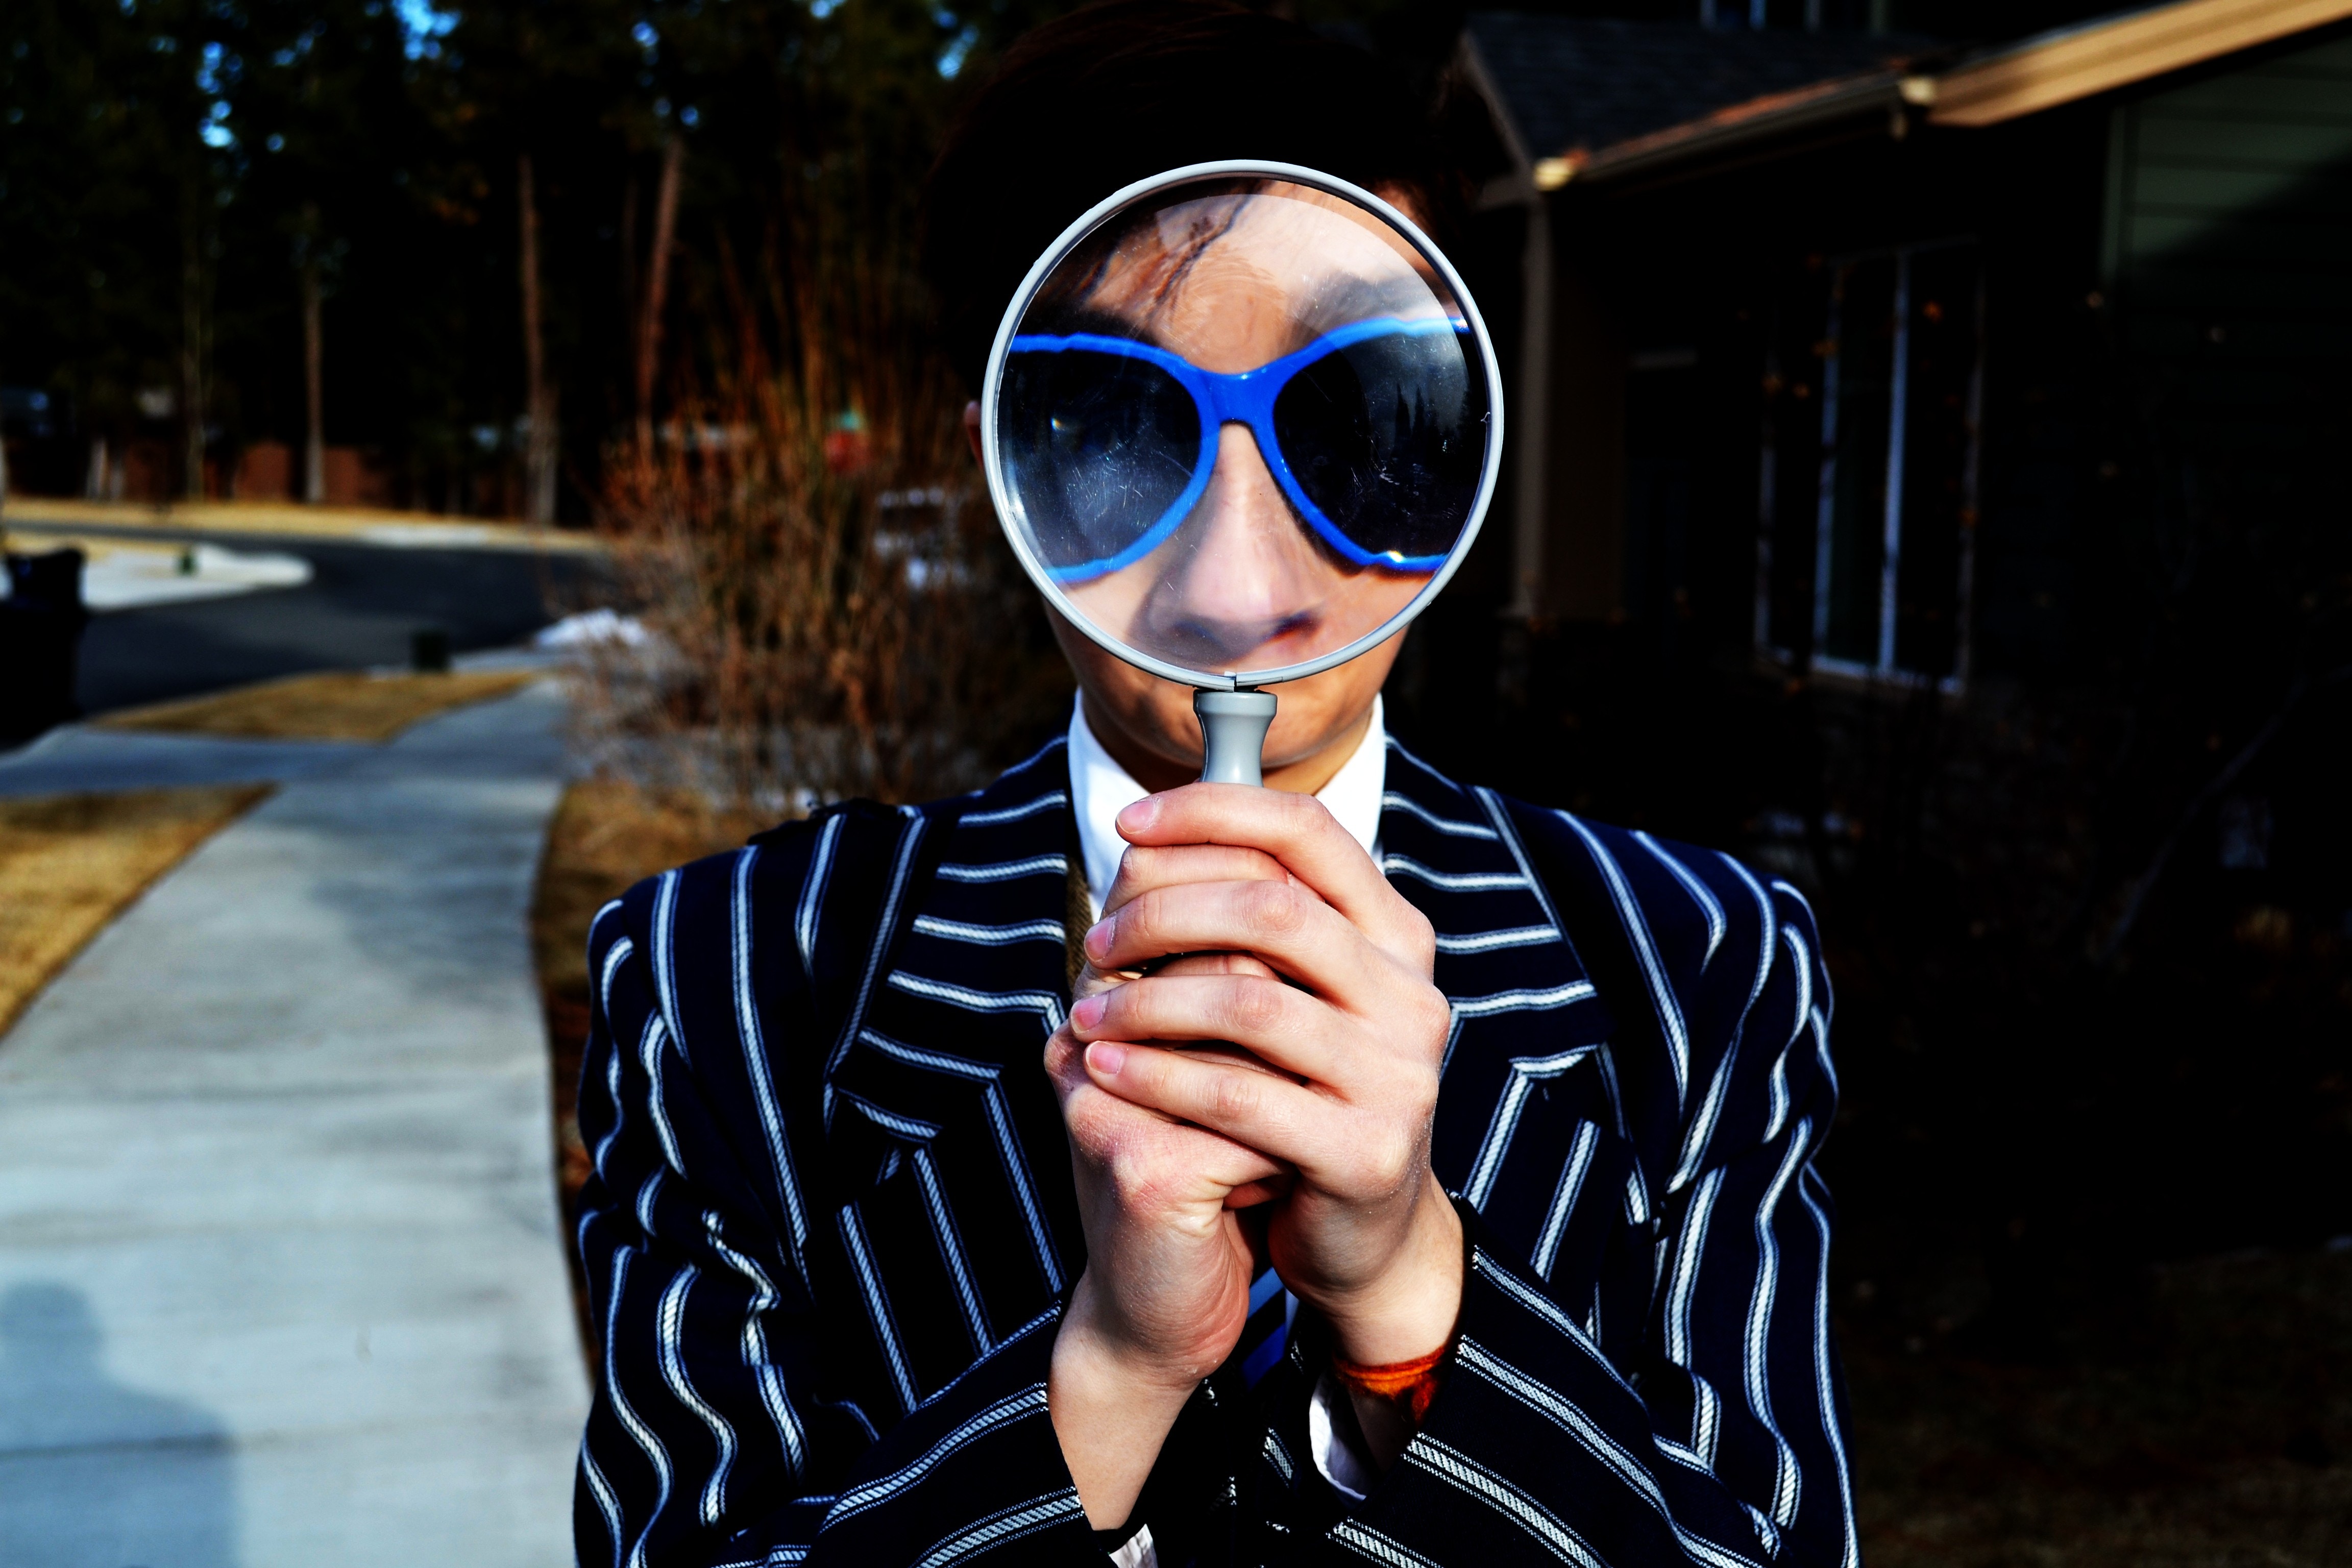 Person wearing sunglasses looking through a magnifying glass - SEO techniques for Content marketing